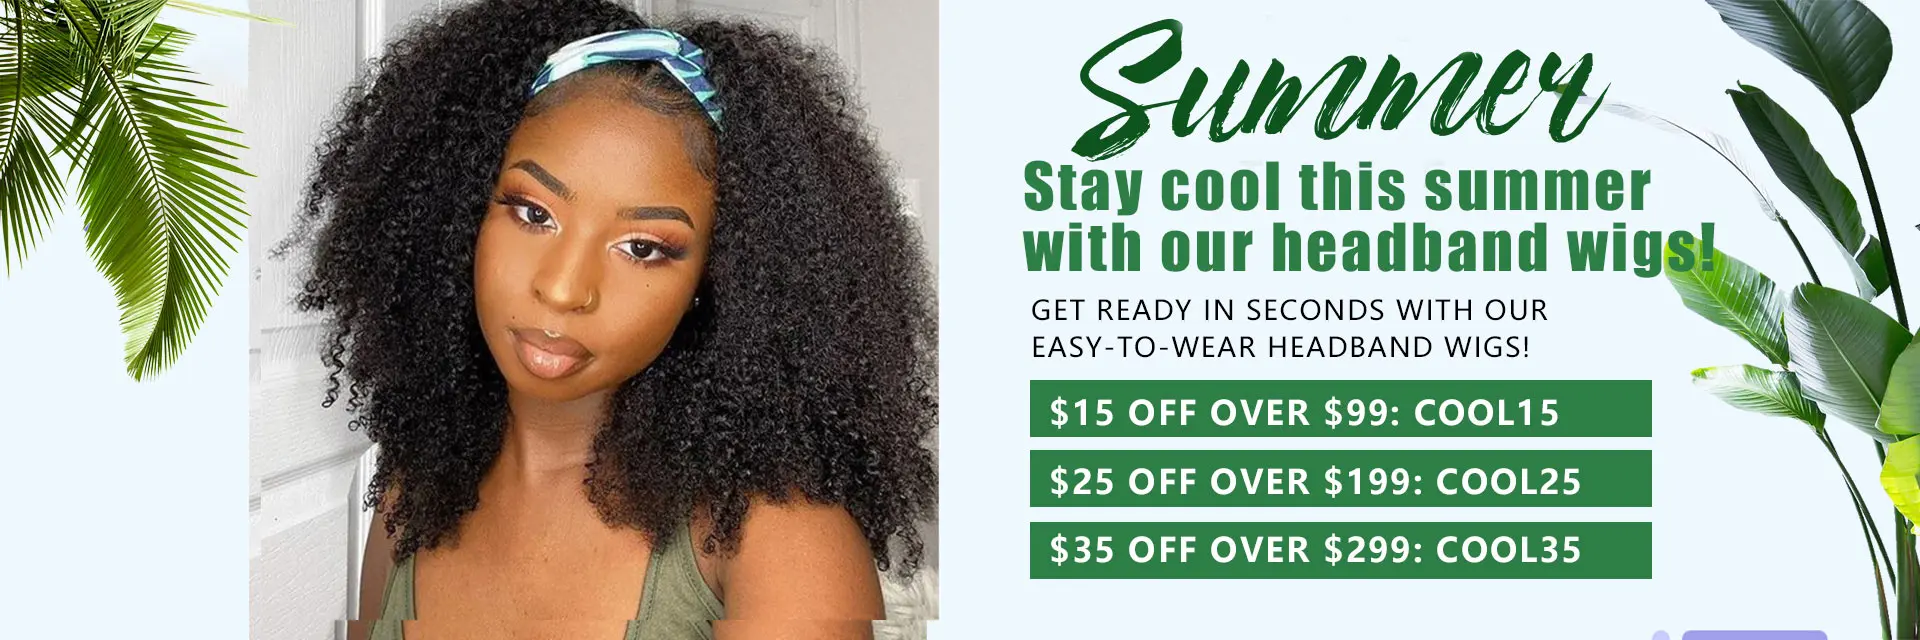 Stay cool this summer with our headband wigs!